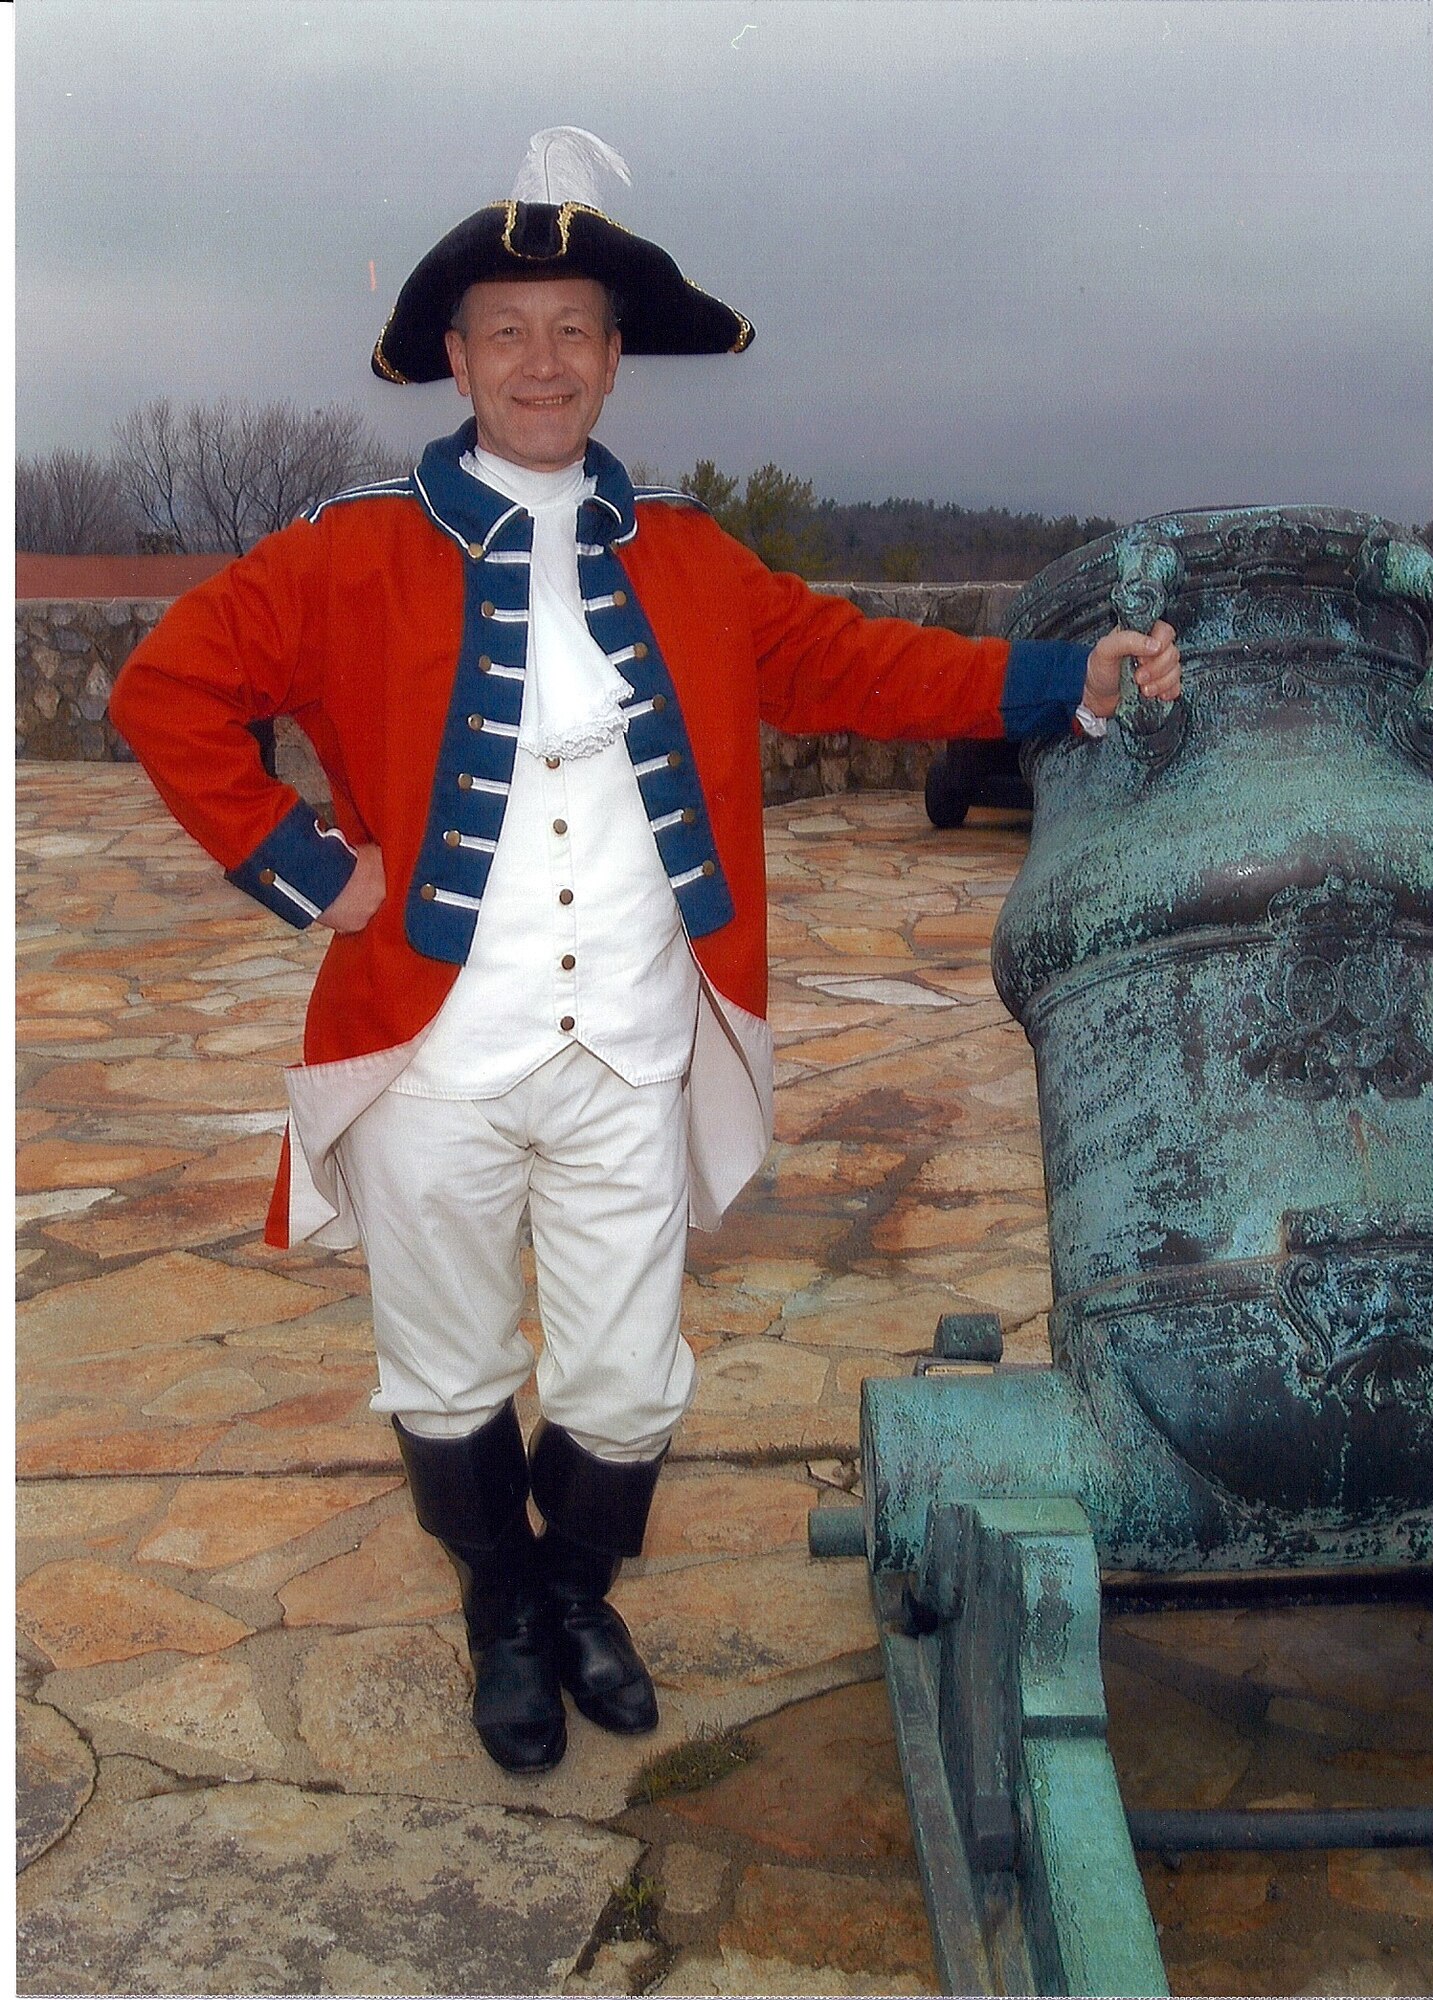 Maj. Gen. Eric Crabtree, dressed as Revolutionary War officer General John Burgoyne, poses on a field trip to Ft Ticonderoga and Saratoga Revolutionary War battlefields.  He was assigned the character to portray as part of the National Security Manager's Course.  Maj. Gen. Crabtree is commander, Headquarters Fourth Air Force, March Air Reserve Base, Calif.  (Courtesy photo)